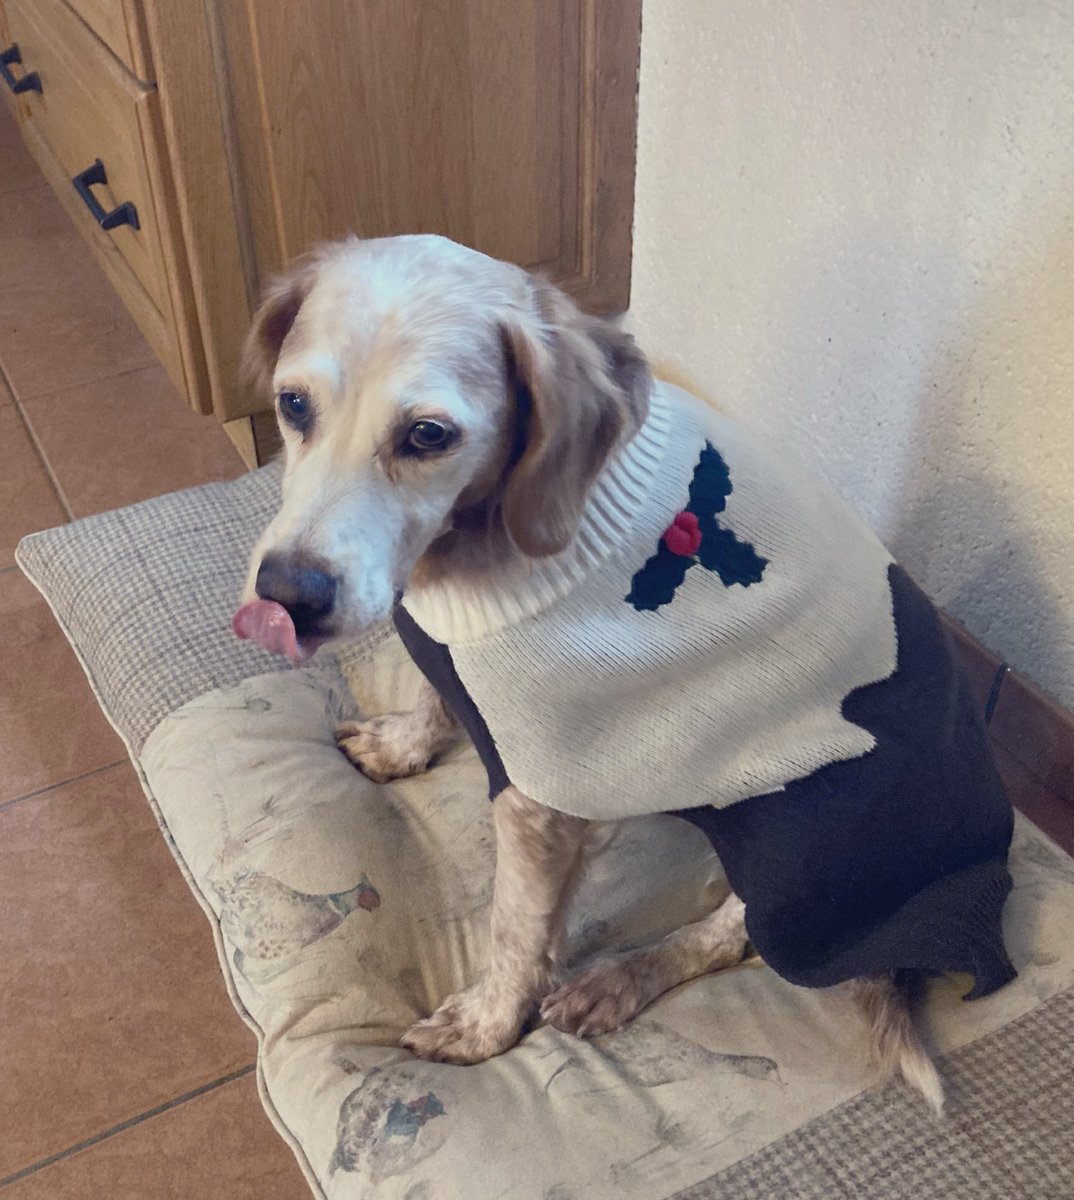 Frens, #TongueOutTuesday from Lady Iris modelling this season’s must-have #Christmas coat 🤣👍🎅🎄❄️🥶#dogsoftwitter PS pawrents are back home & they brought us lots of BACON treats 🥓👍💙👏🥓👍💙💙🥓👍💙💙👏 #nortysquad #MaxandMenace